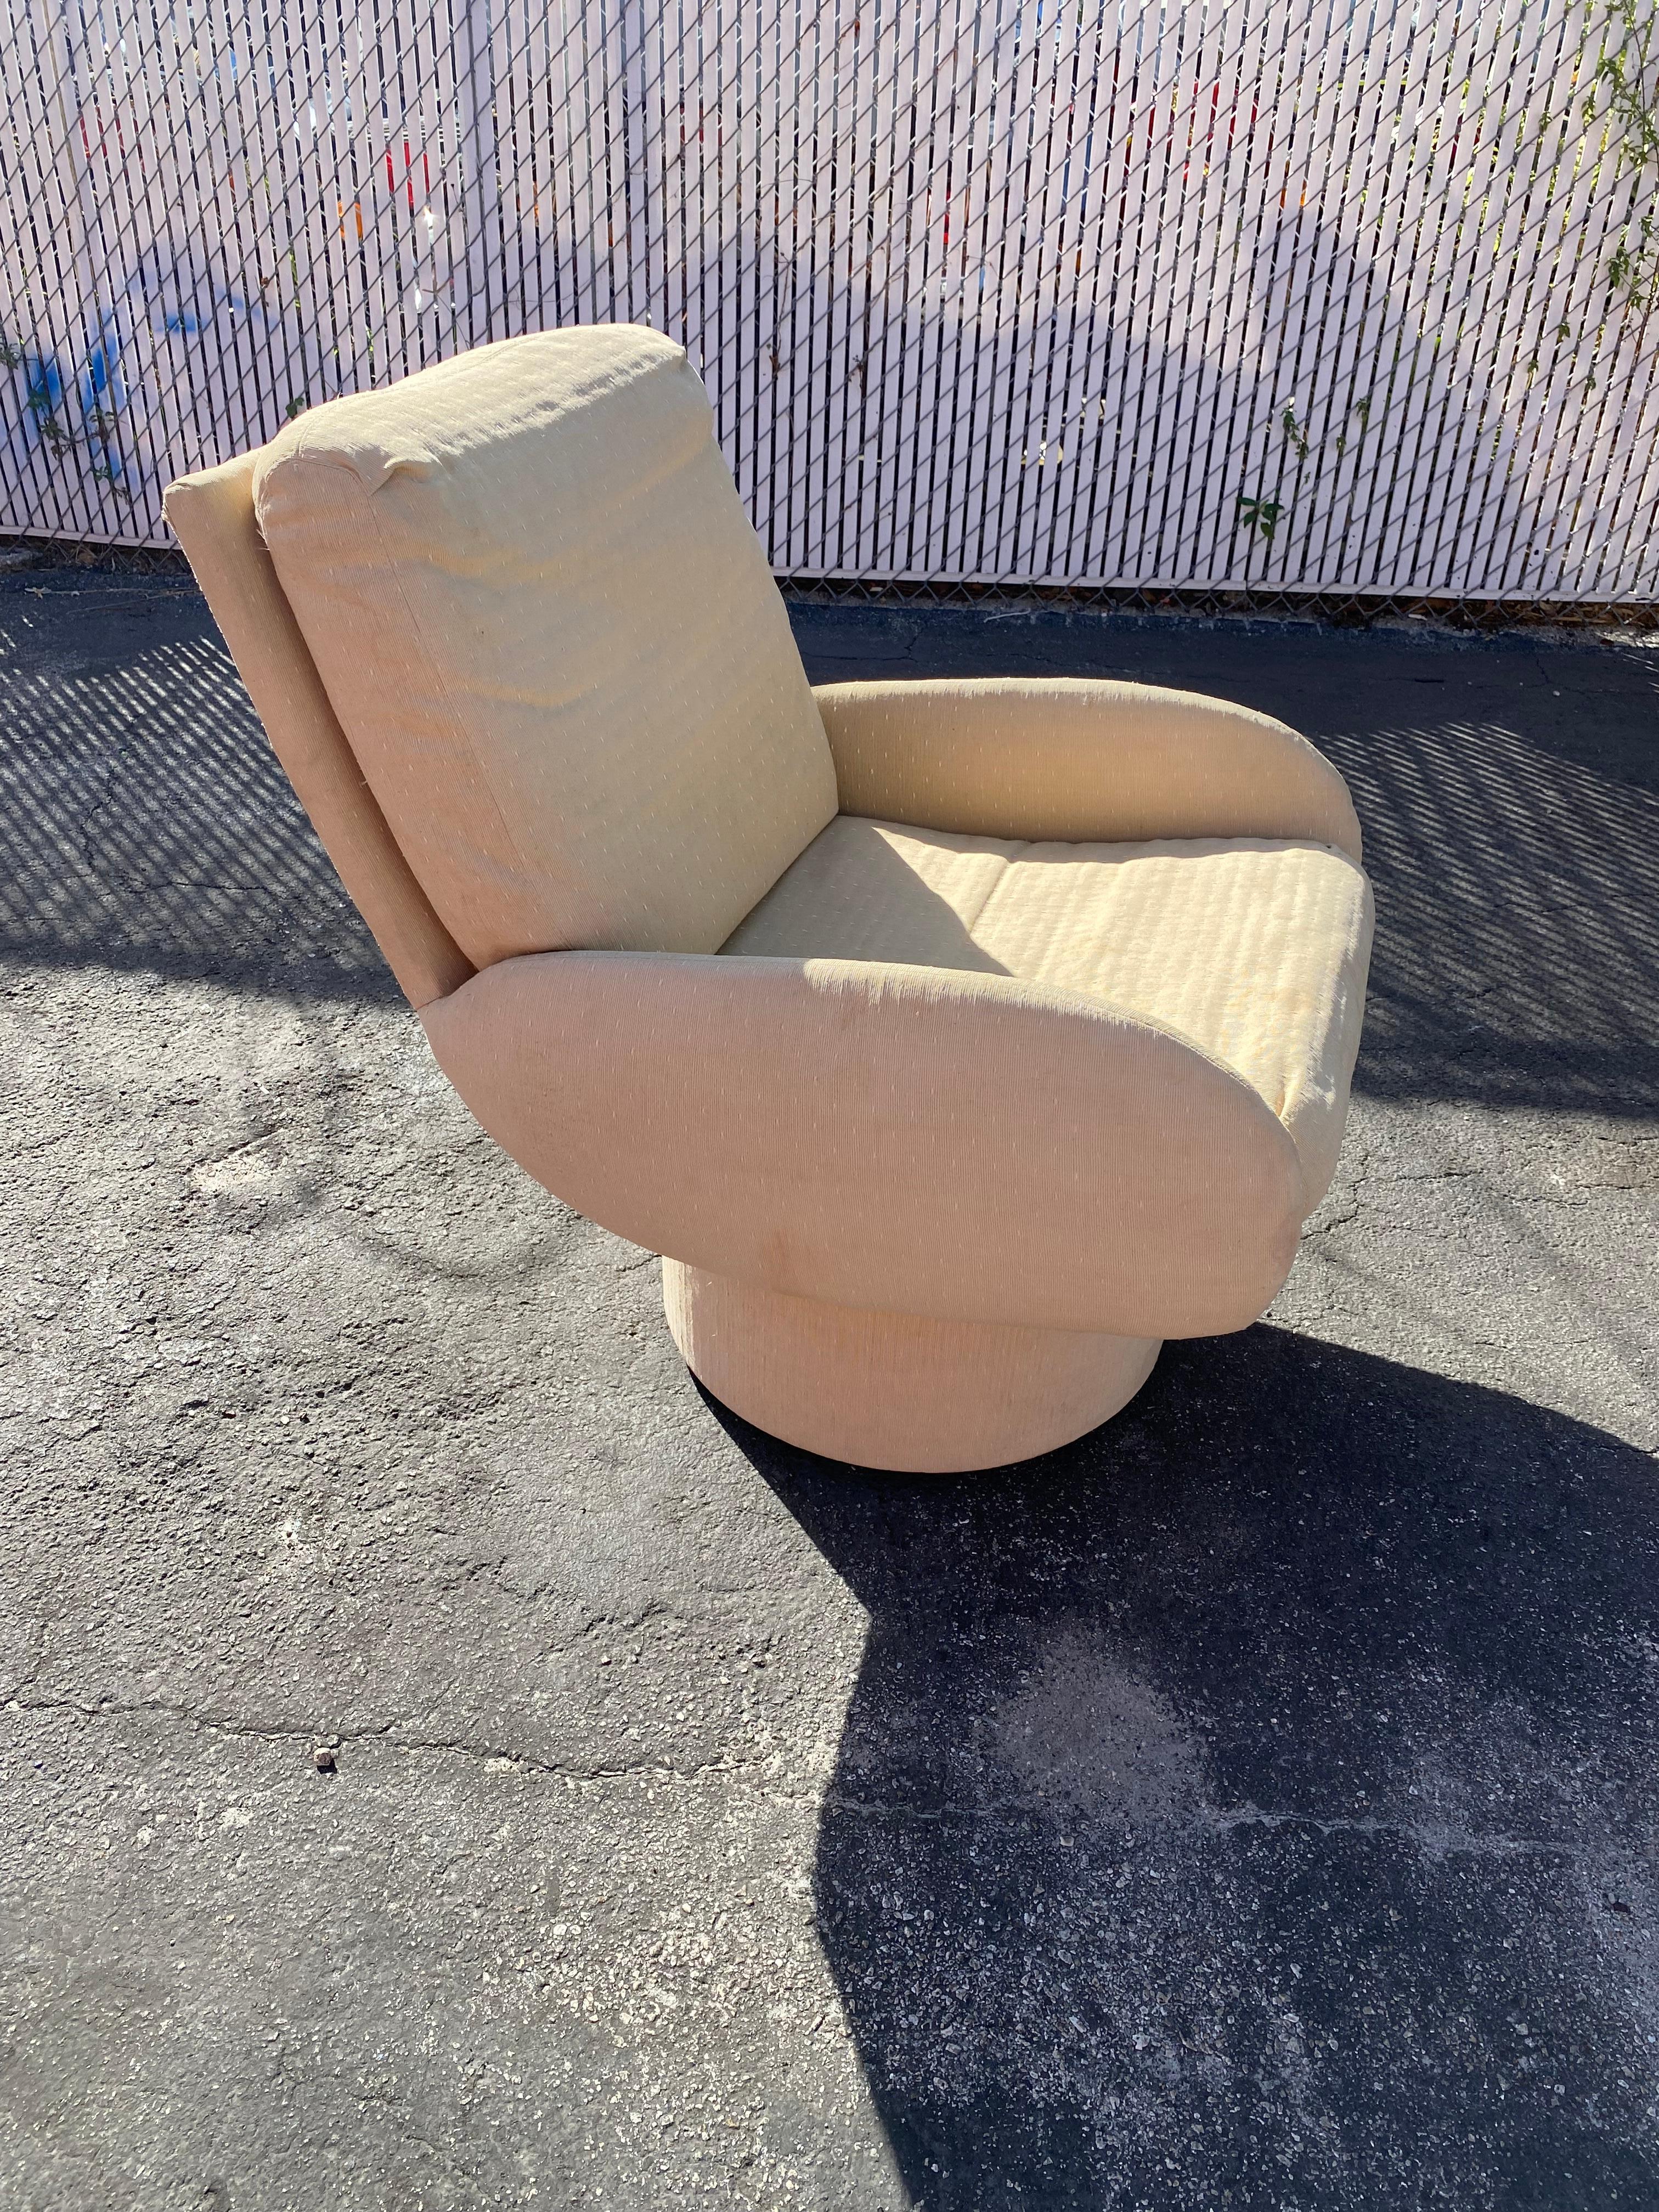 On offer on this occasion is one of the most stunning, swivel chair you could hope to find. Outstanding design is exhibited throughout. The beautiful chair is statement piece which is also extremely comfortable and packed with personality! Firm